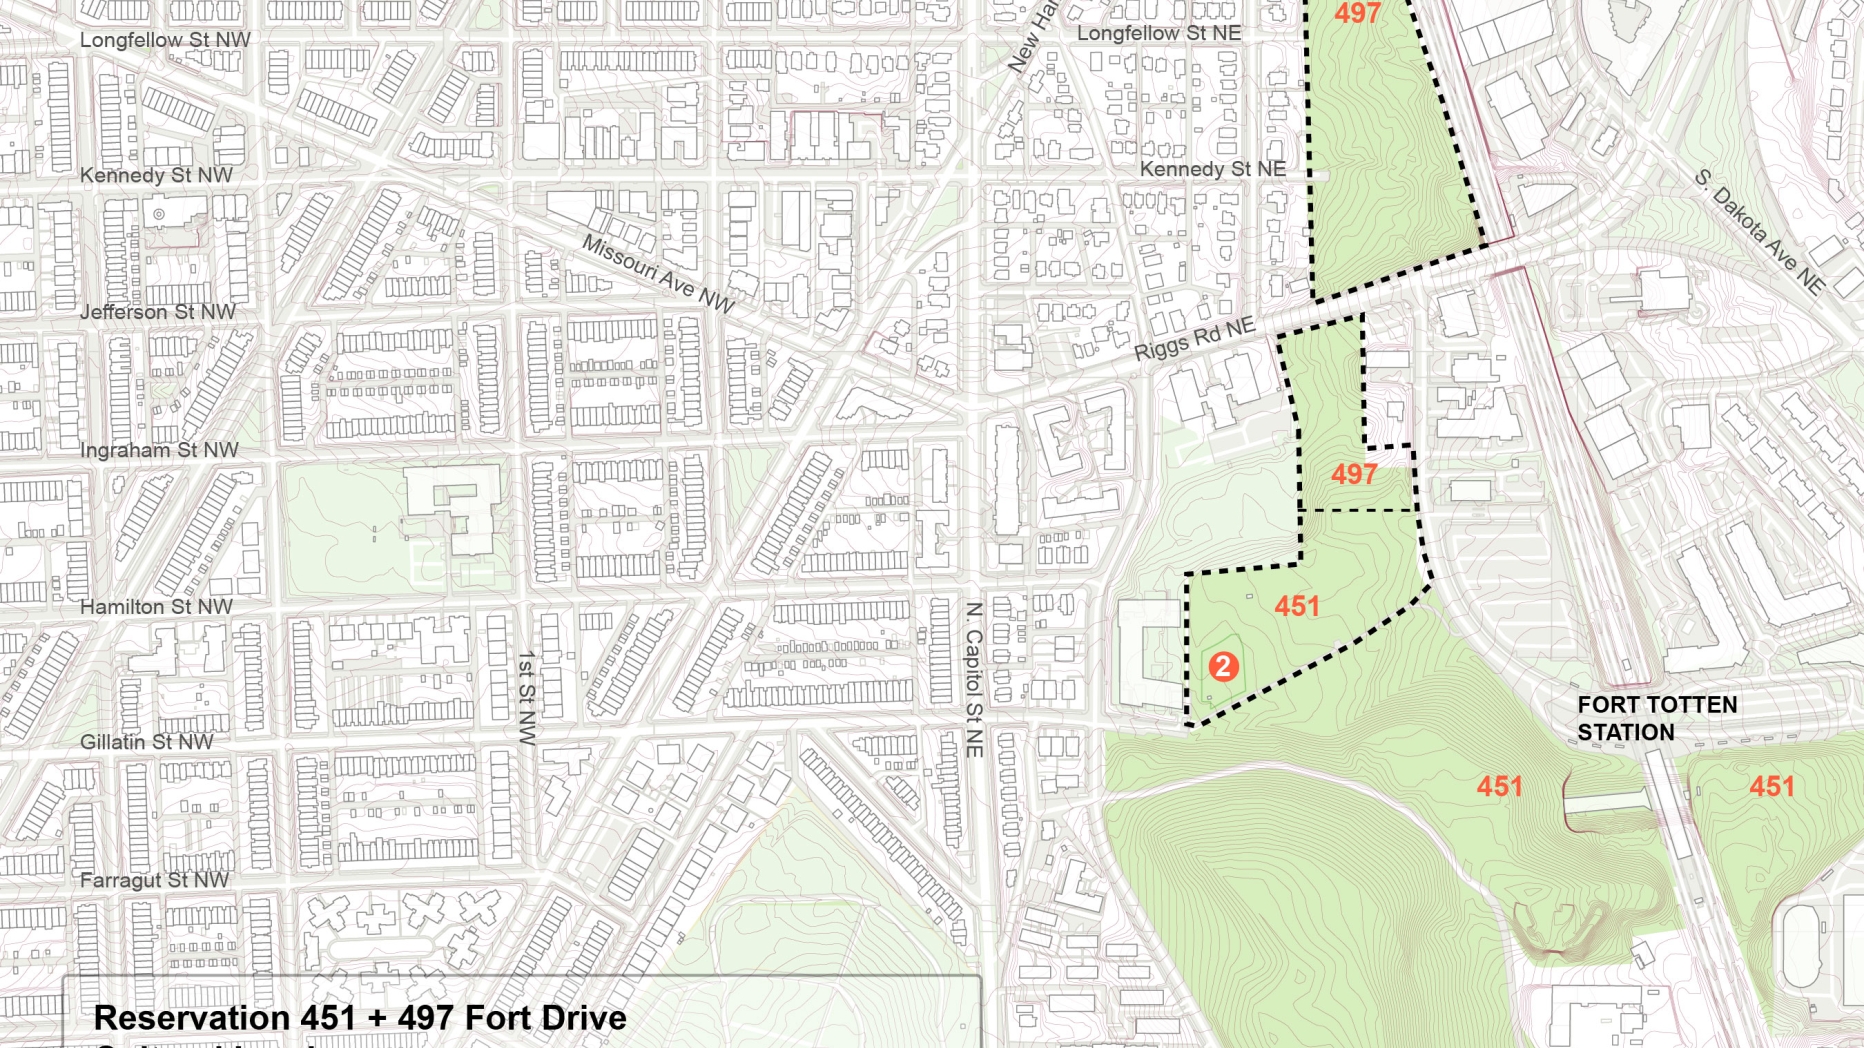  Map of fort drive cultural landscape. Key landmarks are the Blair road and Mamie D Lee cultural garden